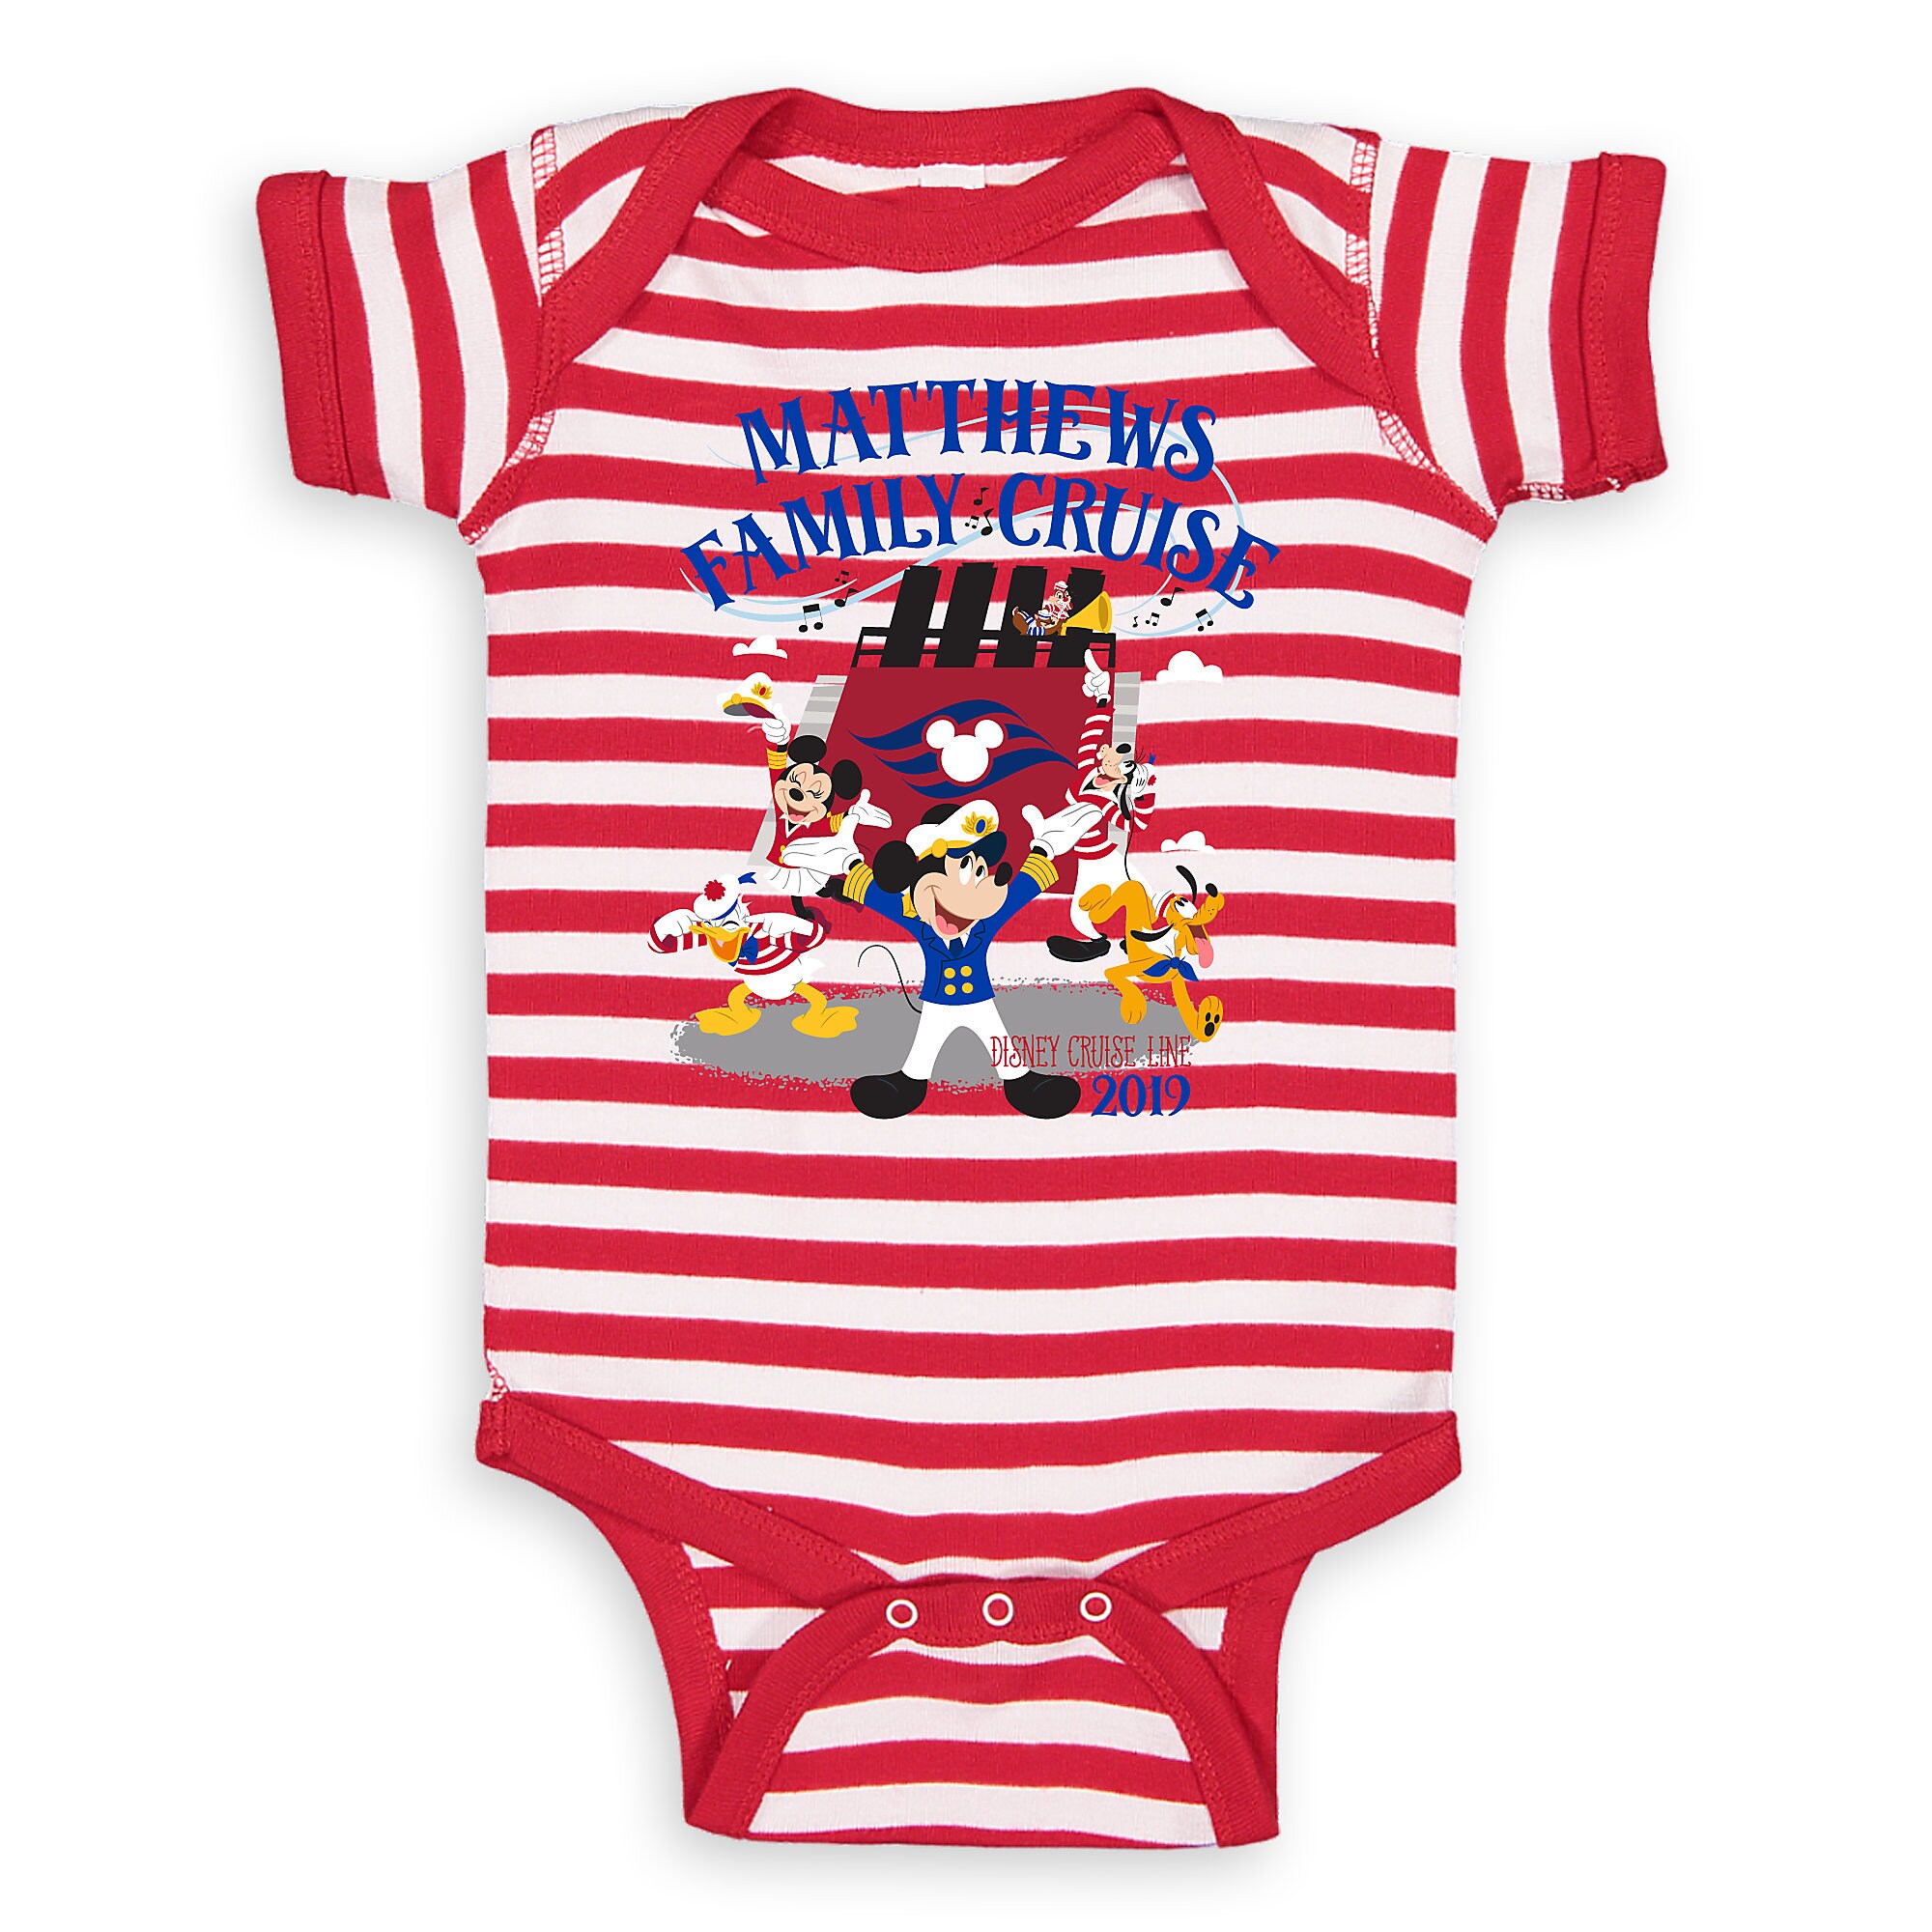 Infants' Captain Mickey Mouse and Crew Disney Cruise Line Family Cruise 2019 Bodysuit - Customized